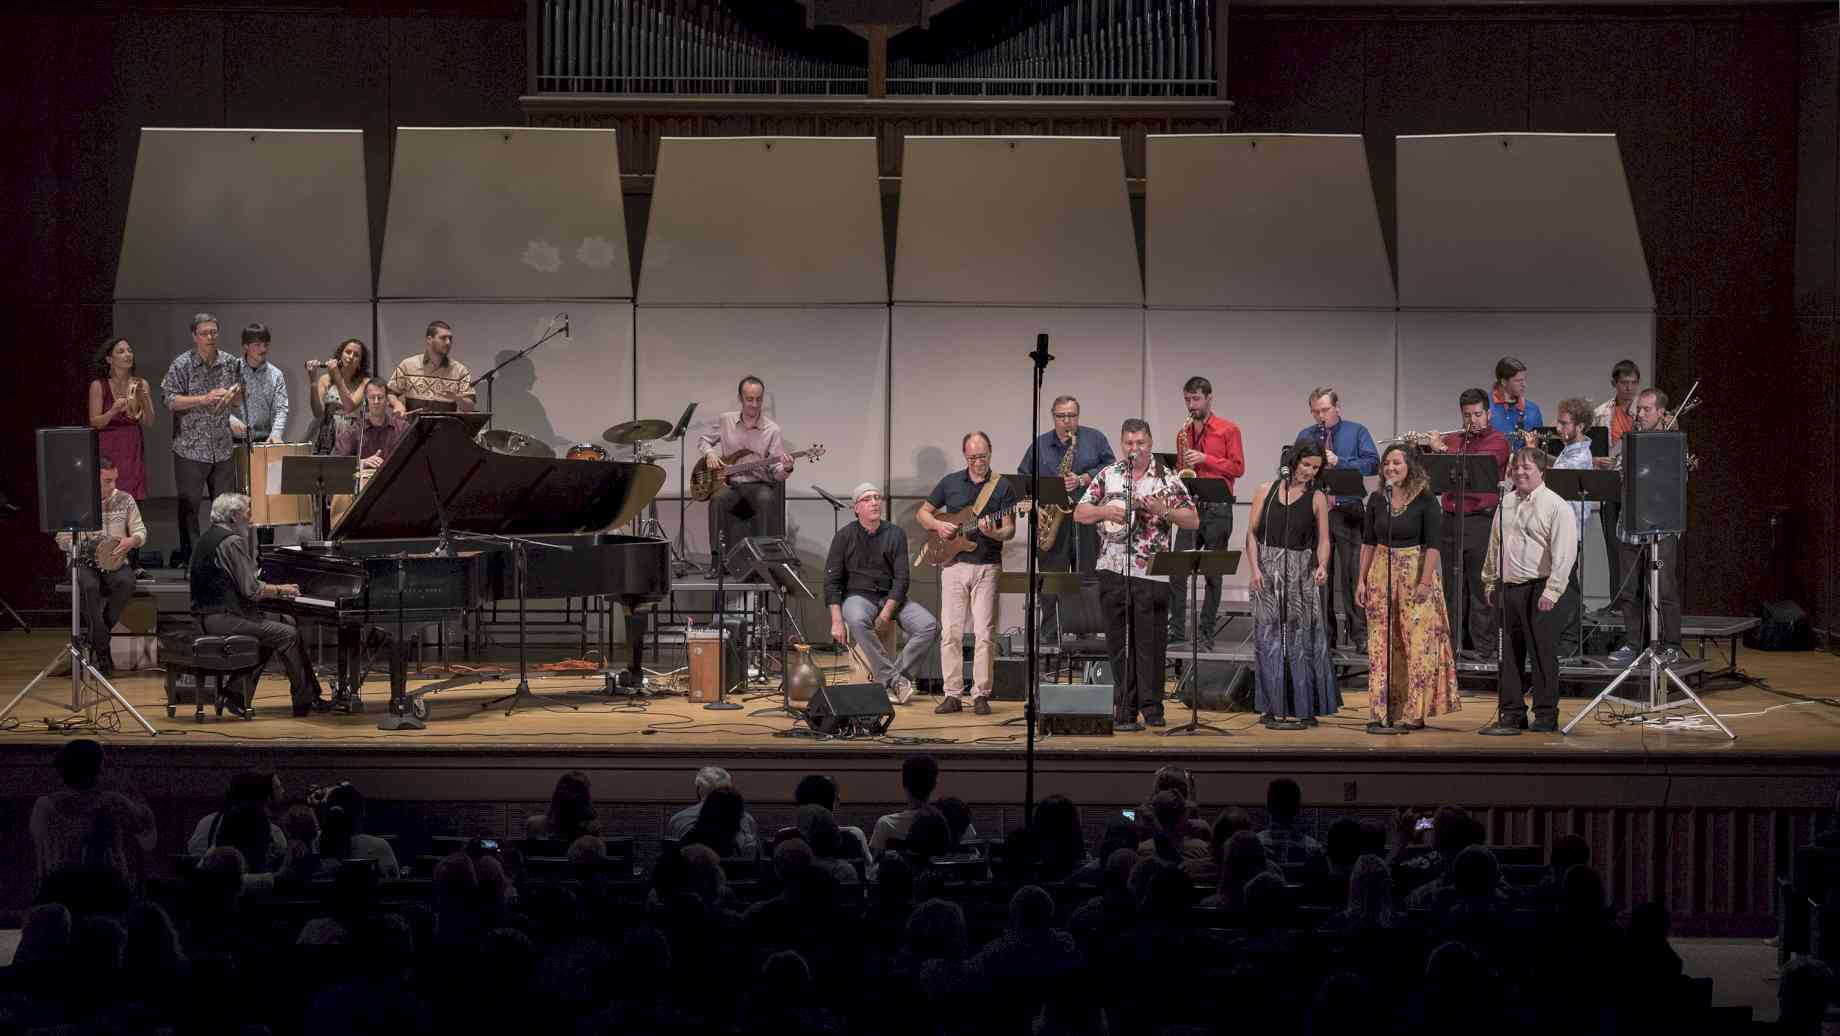 Jacaré Brazil and special guests Cesar Camargo Mariano (piano) and Renato Martins (percussion) at the University Auditorium, University of Florida (Spring 2016)